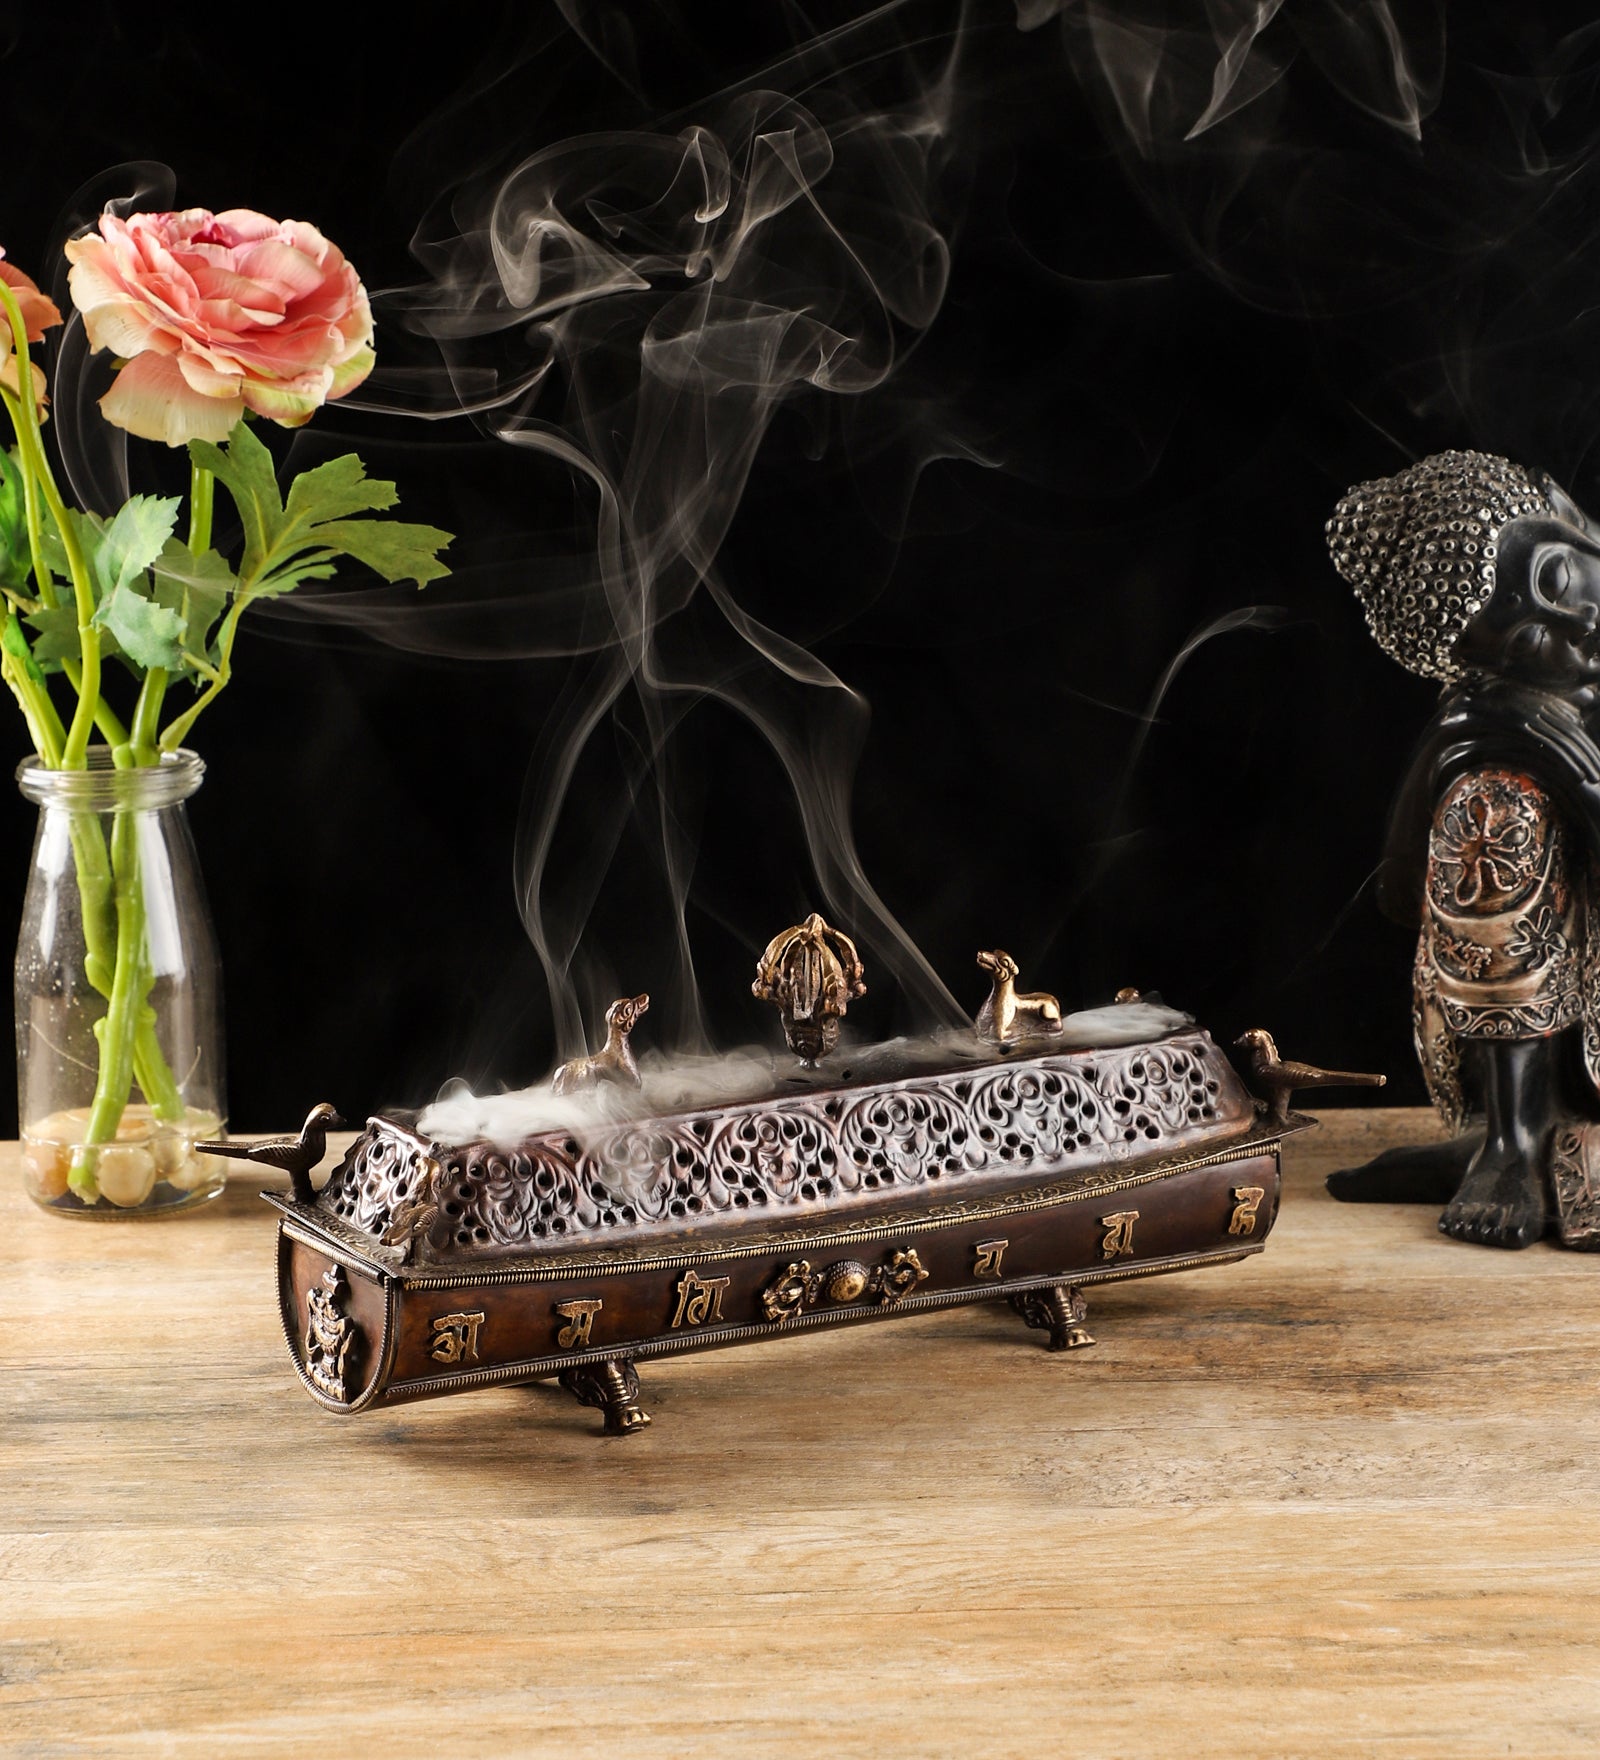 Tranquil Sails - Incense Holder/Table Top Decor